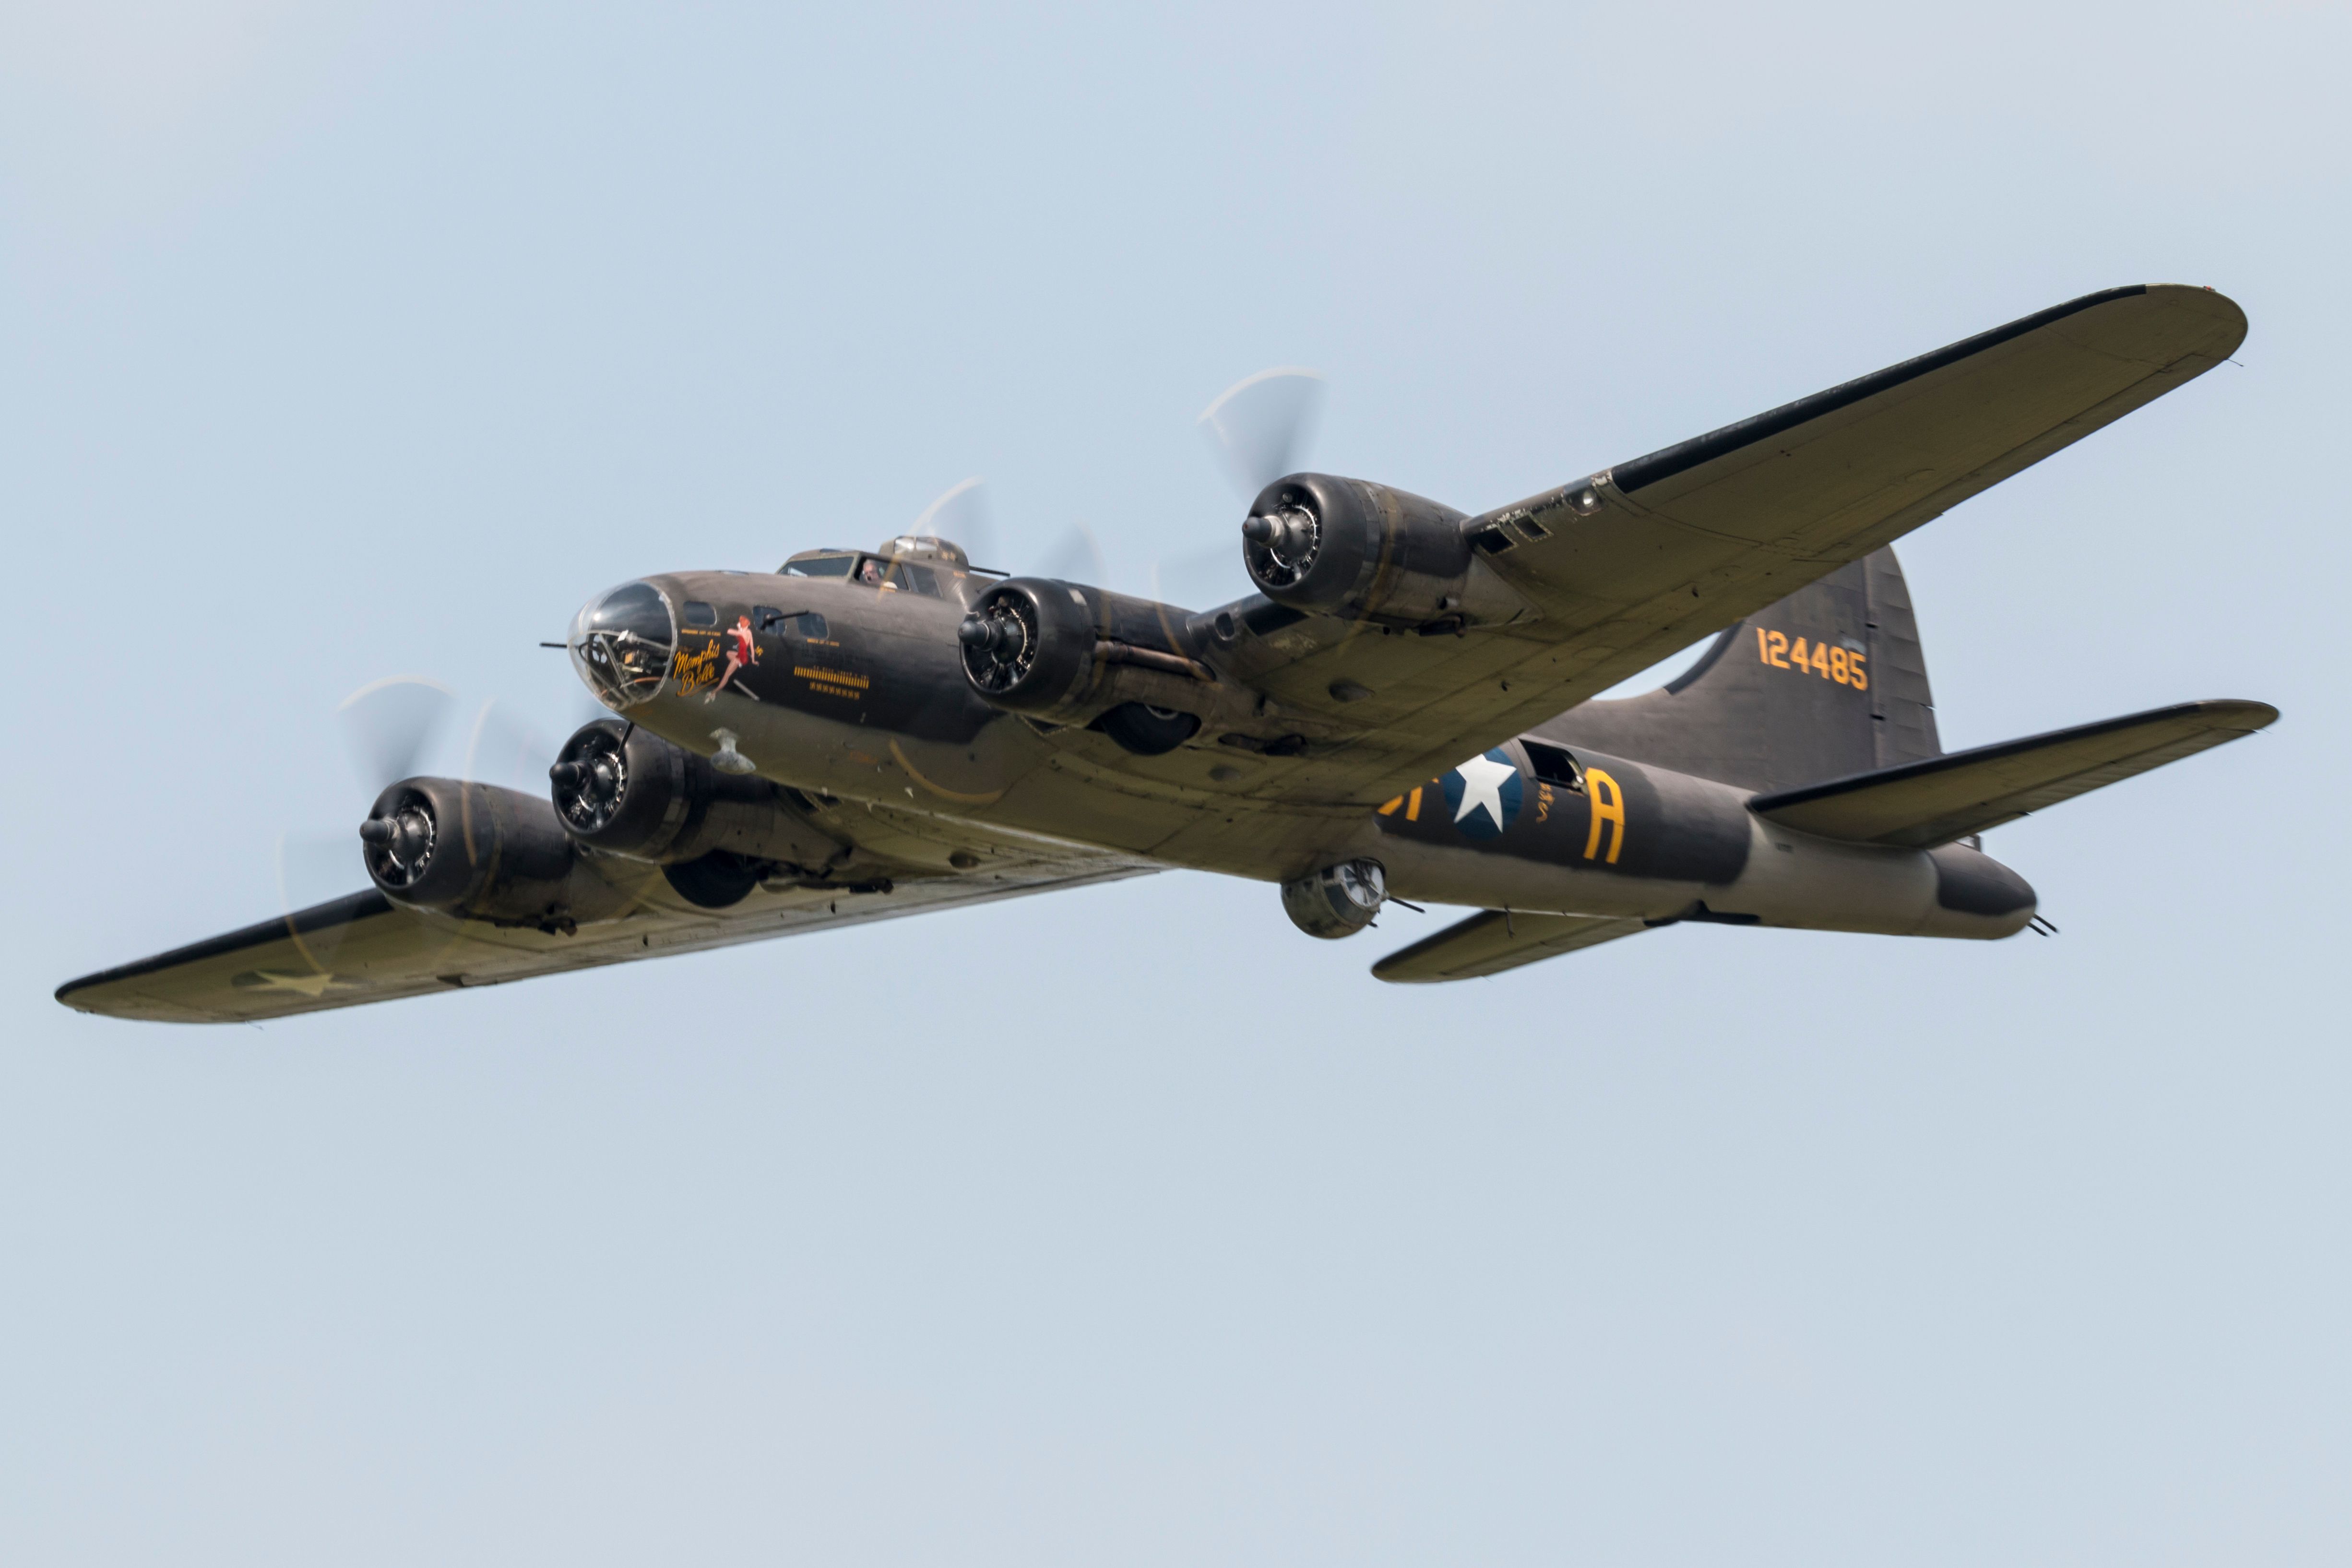 A Boeing B-17 Flying Fortress Flying in the sky.